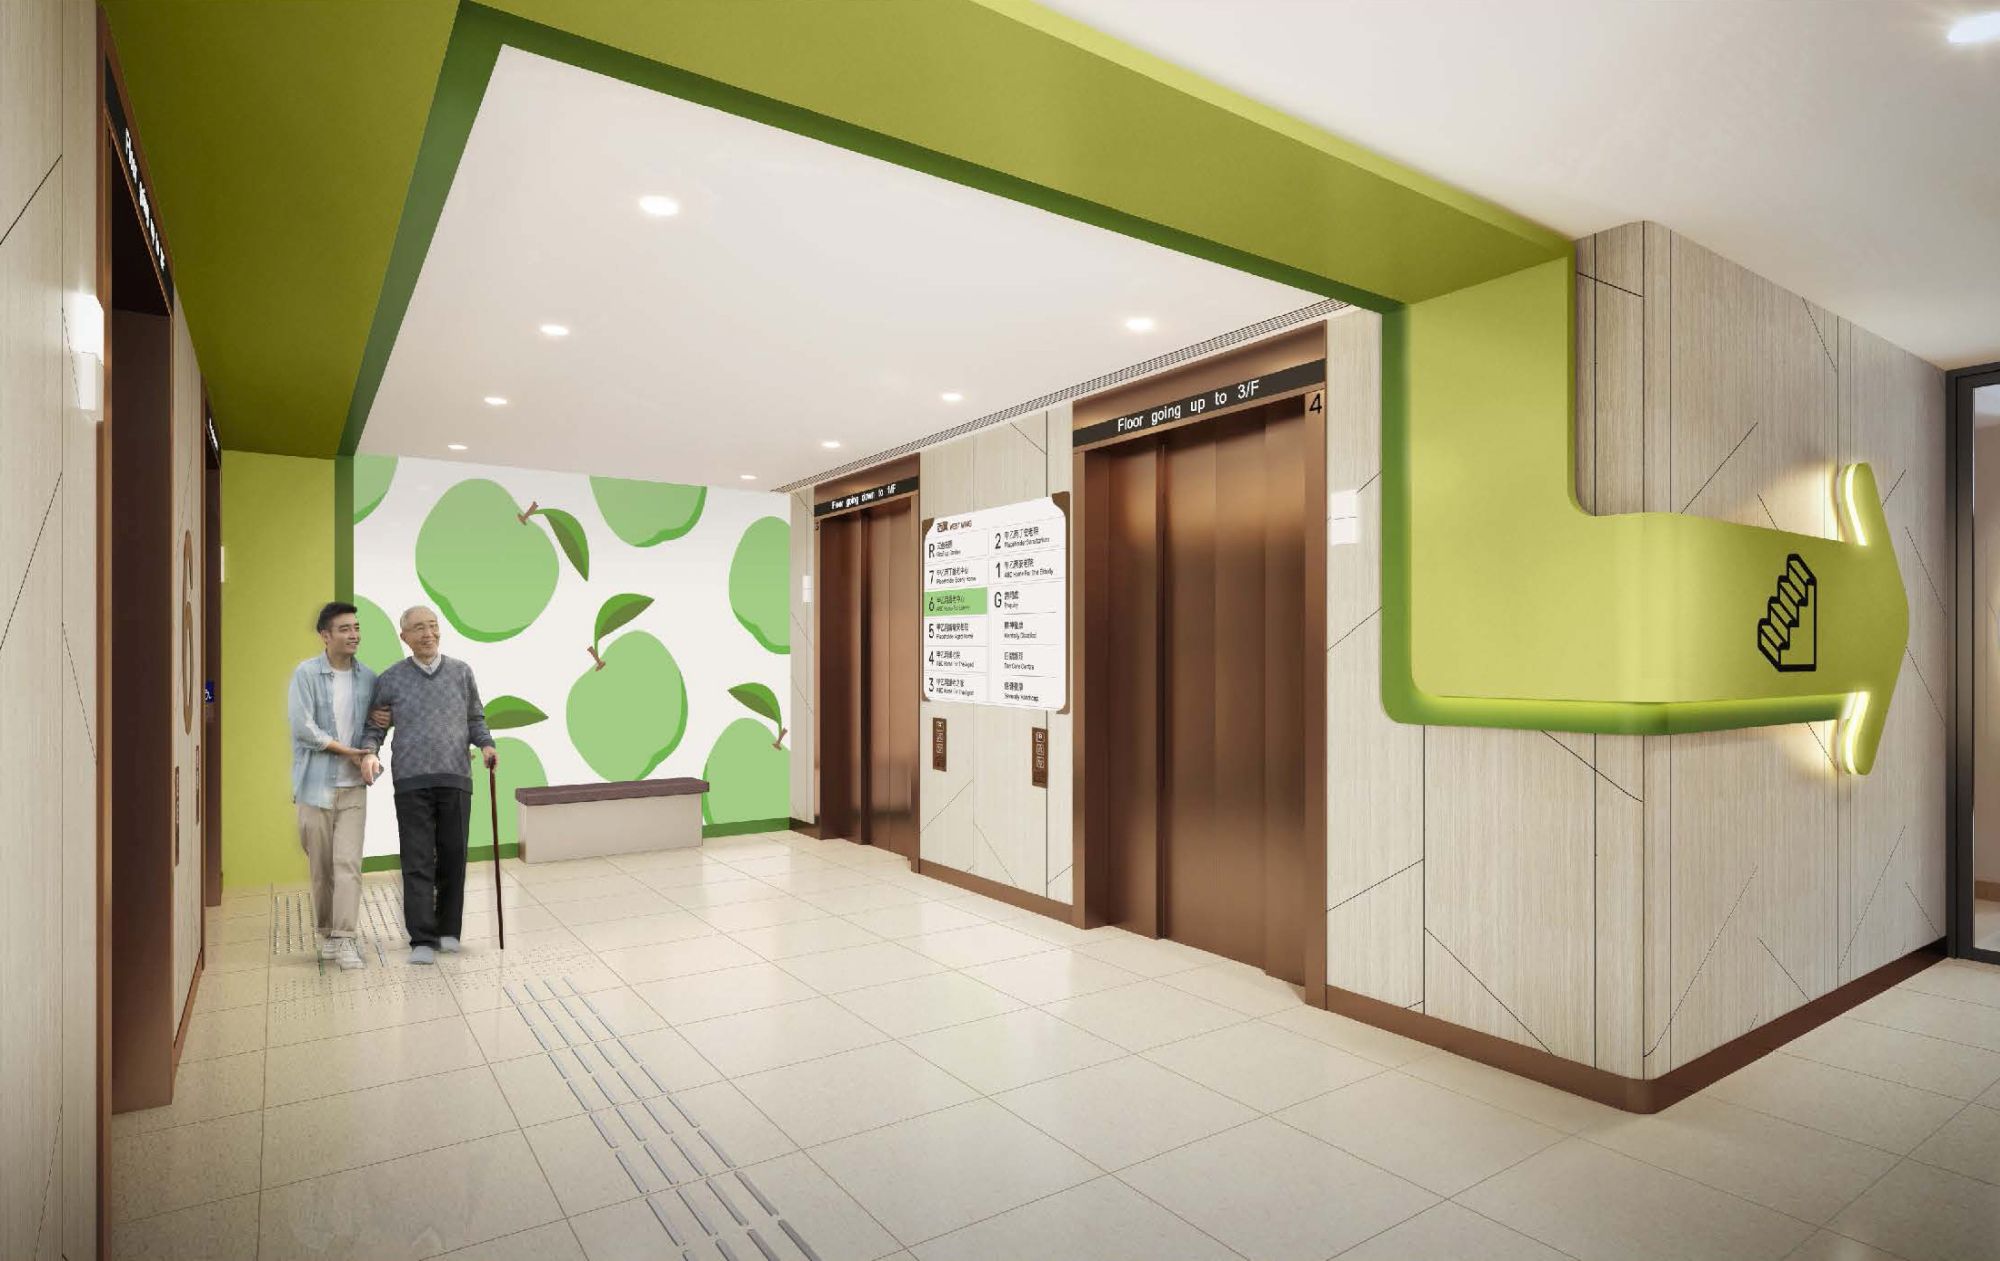 Pictured are the artist’s impressions of some of the lobbies of the Complex.